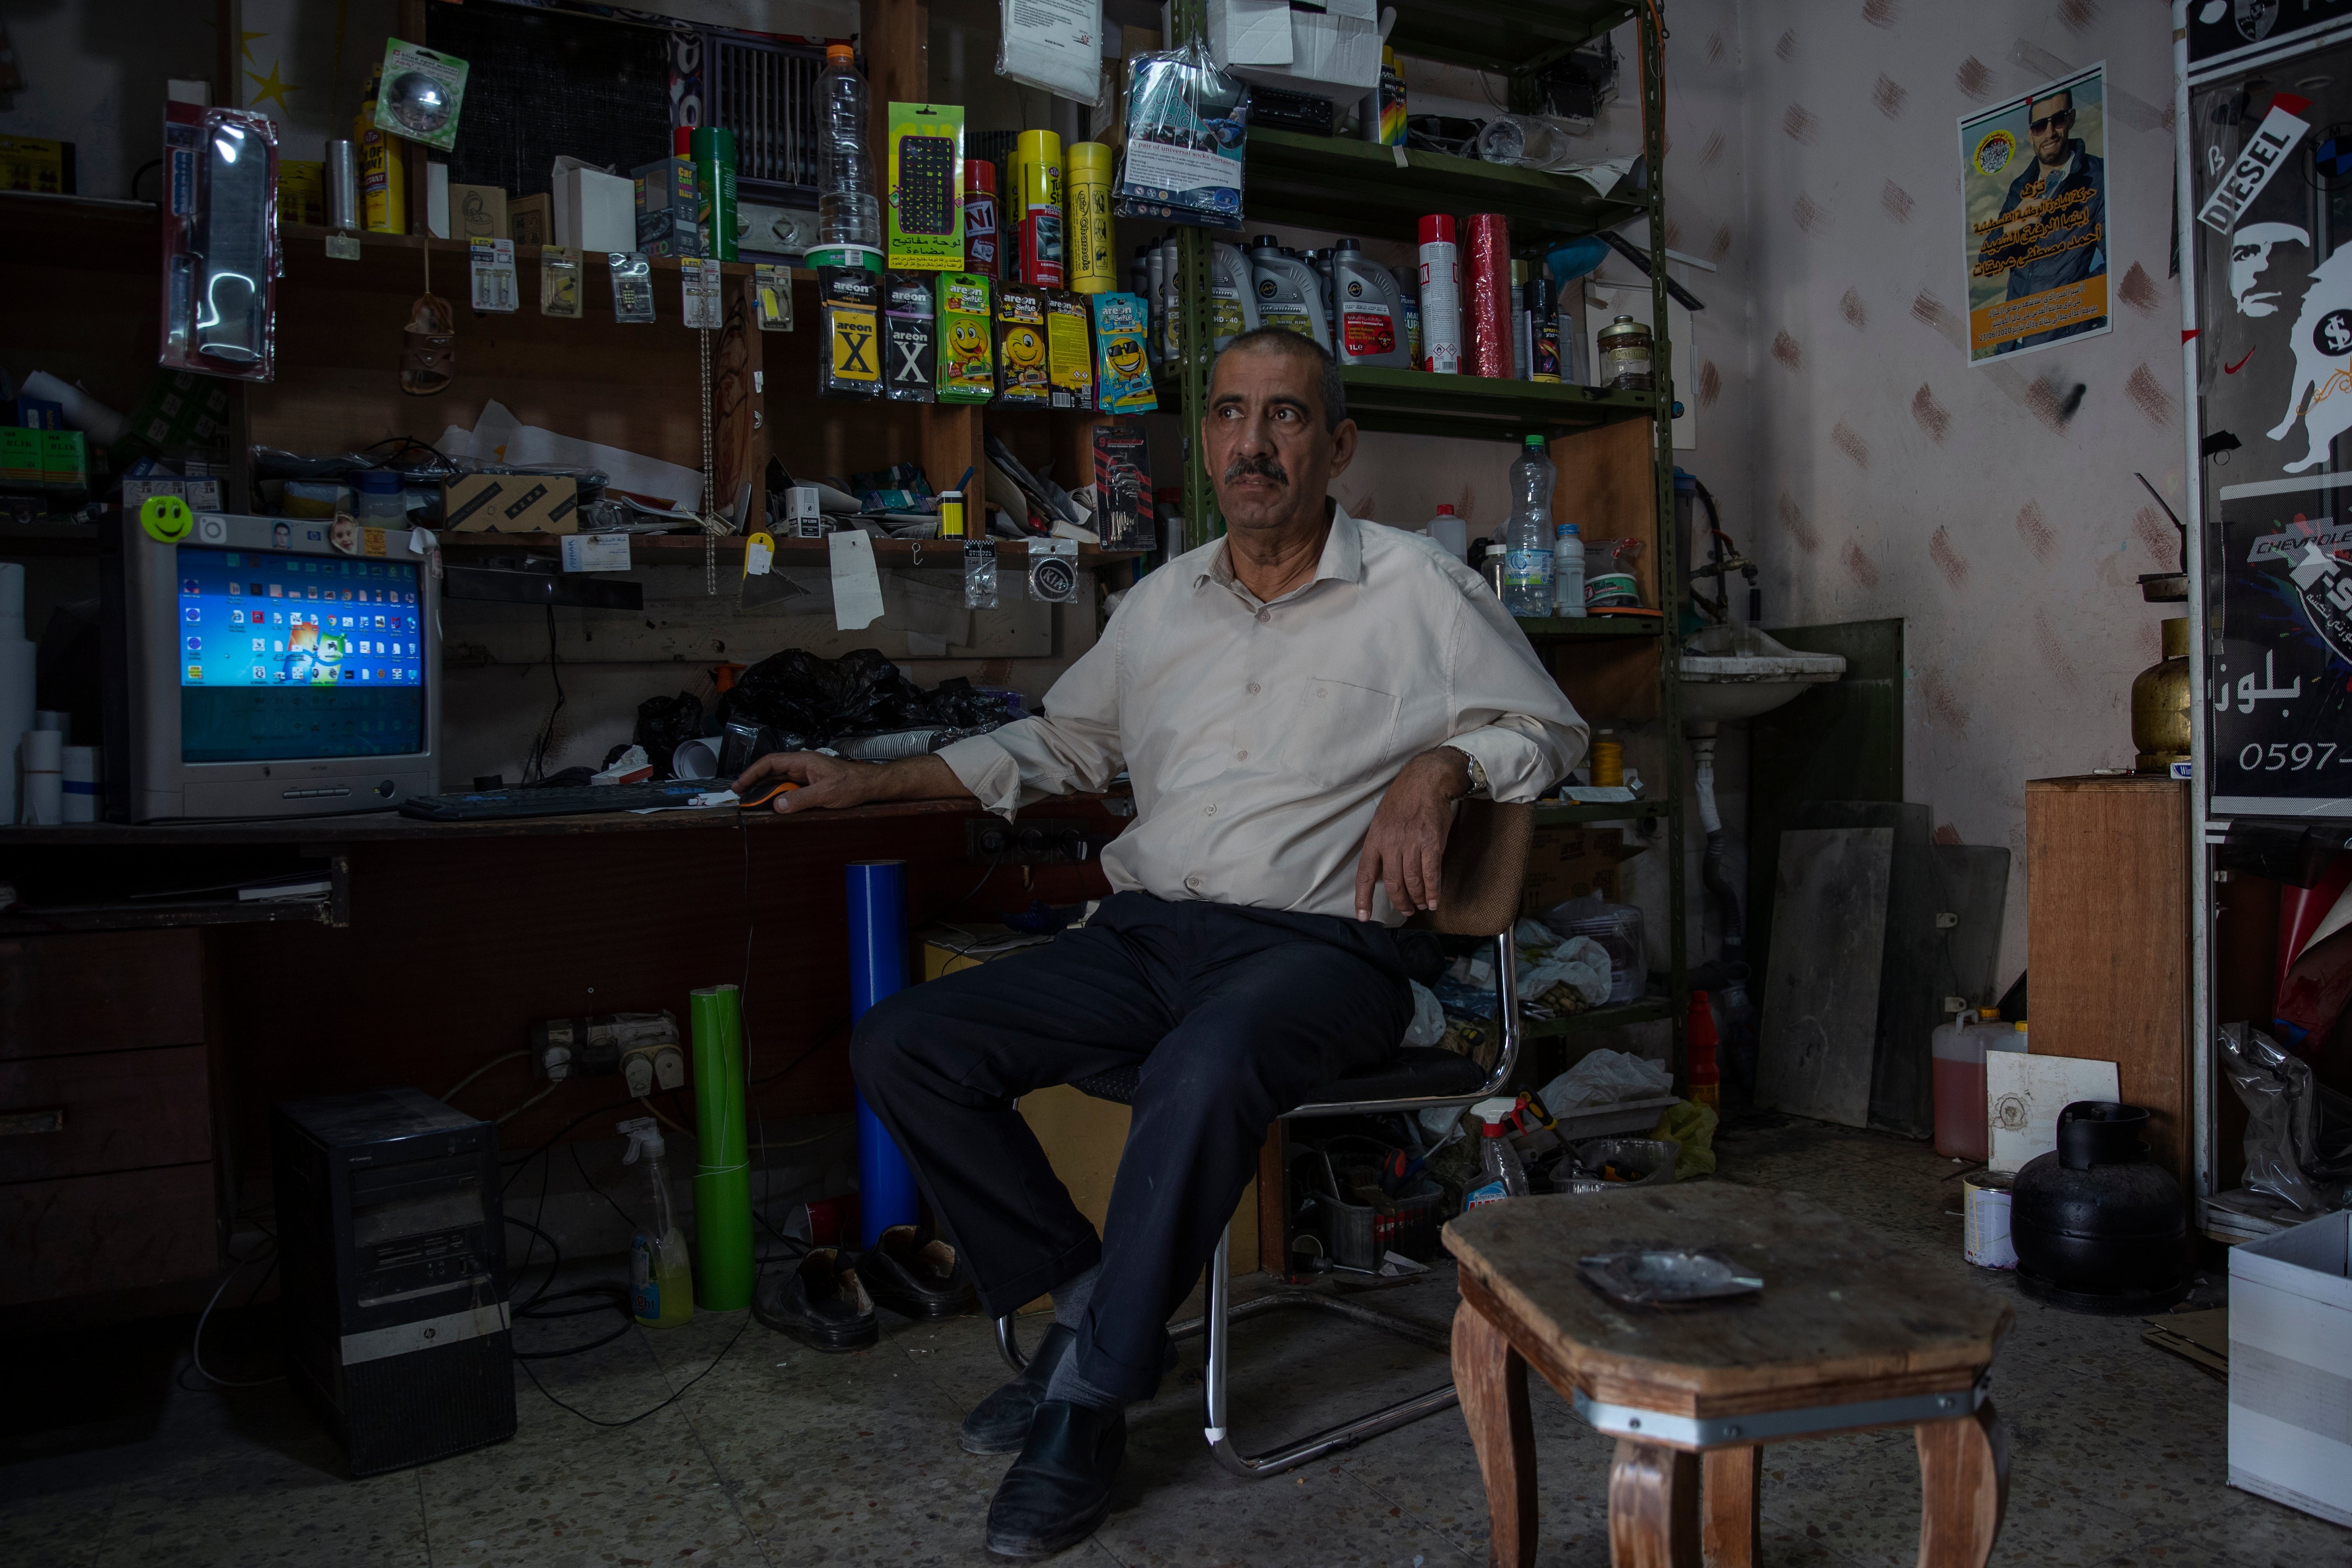 Palestinian Mustafa Erekat, whose son Ahmed was shot dead by Israeli forces at a West Bank checkpoint last year and held his body after, sits at his shop in the village of Abu Dis, South of Ramallah